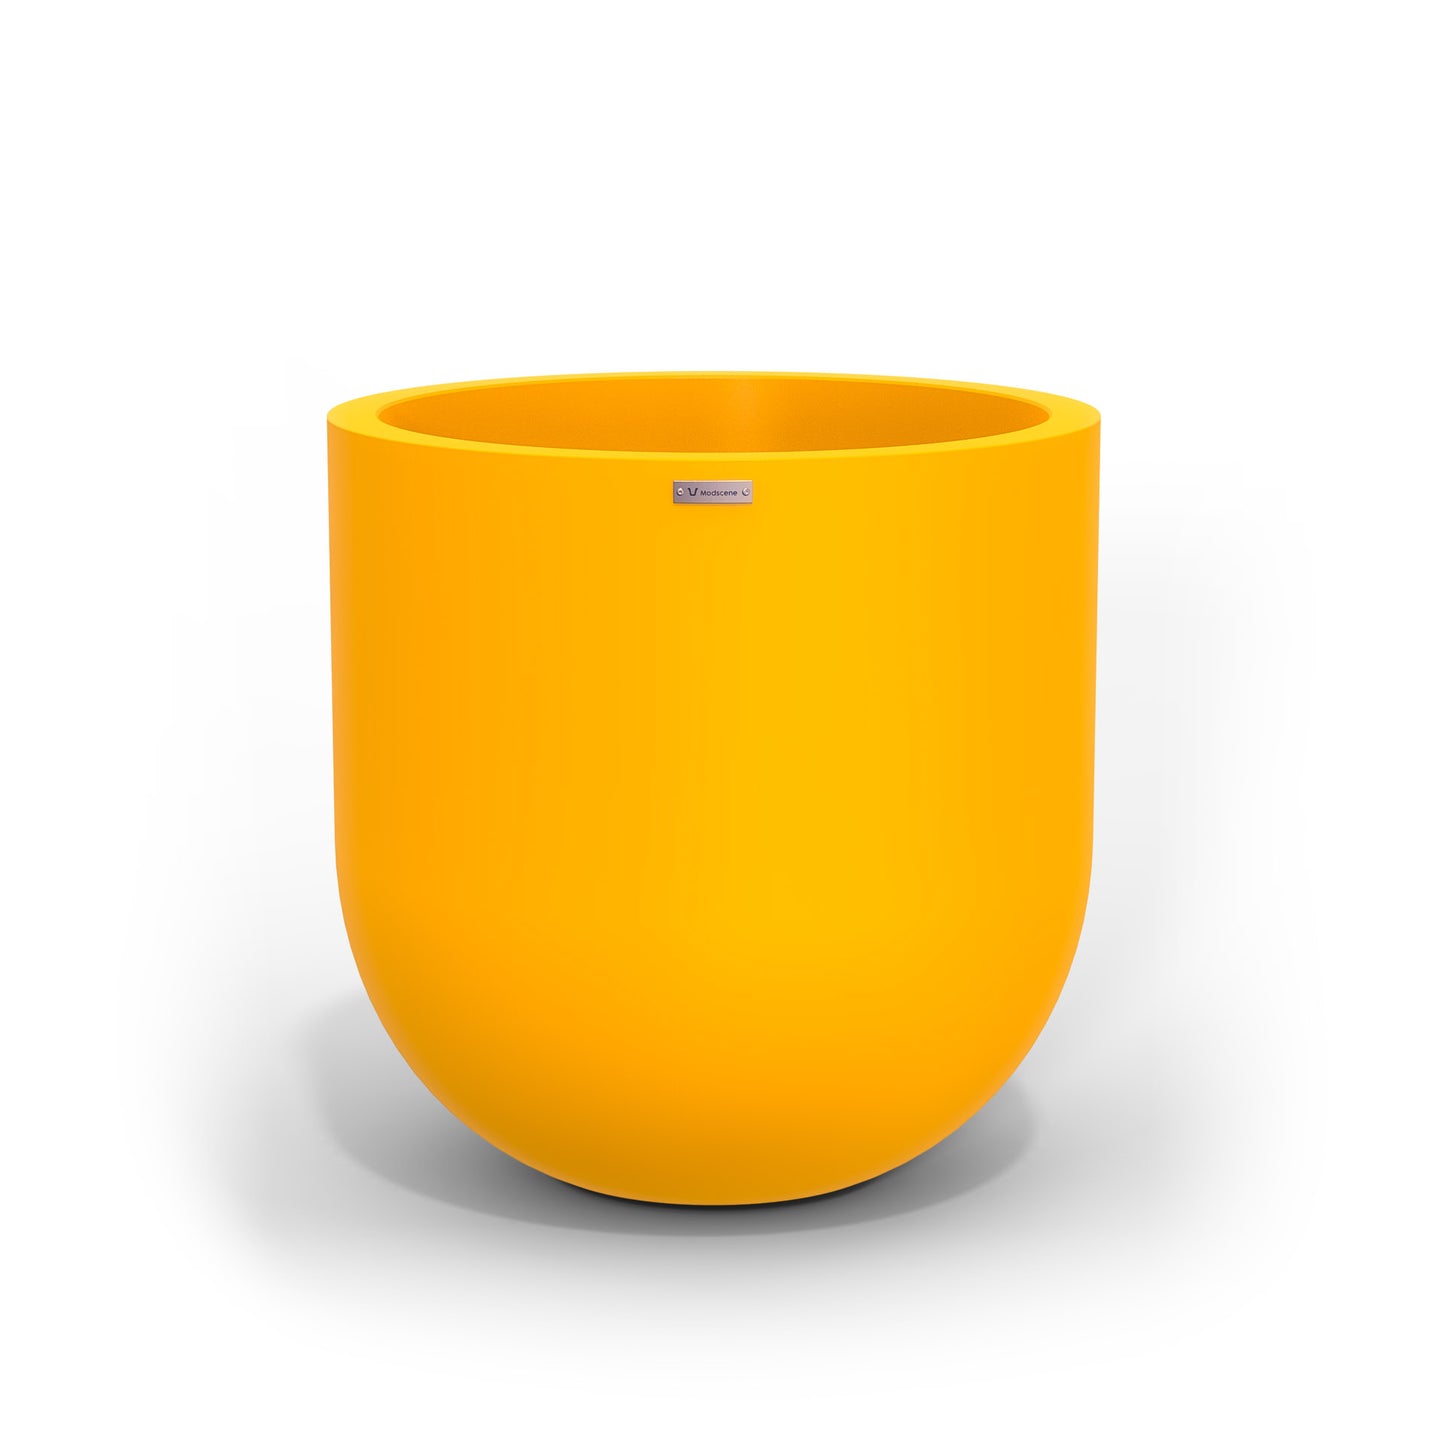 Large Modscene planter pot in a yellow colour. Made in NZ